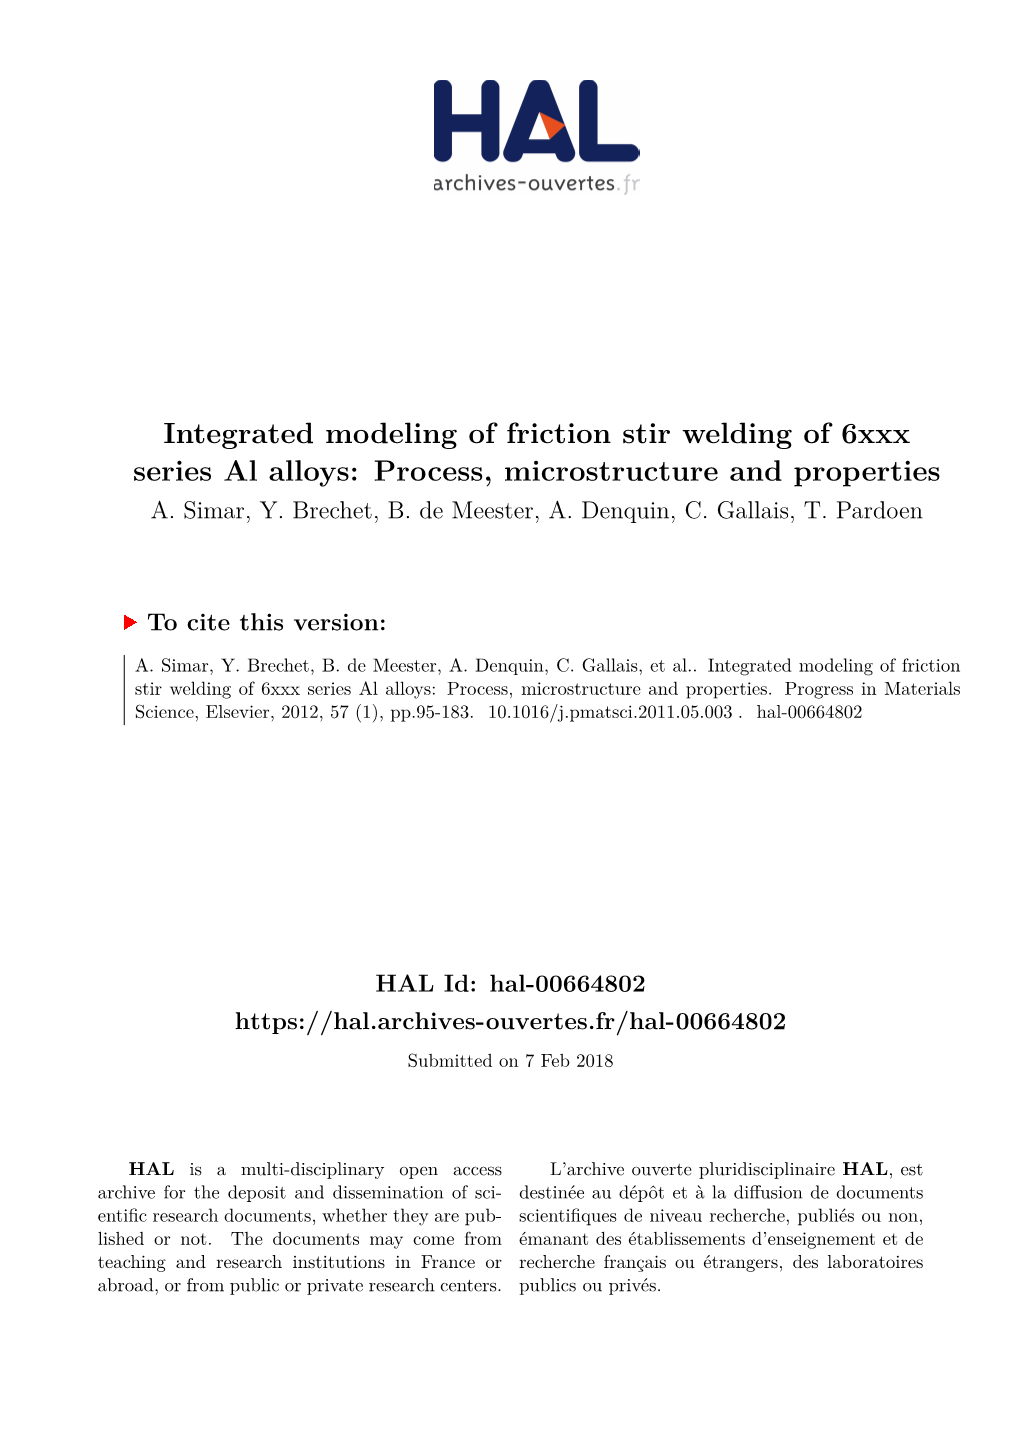 Integrated Modeling of Friction Stir Welding of 6Xxx Series Al Alloys: Process, Microstructure and Properties A